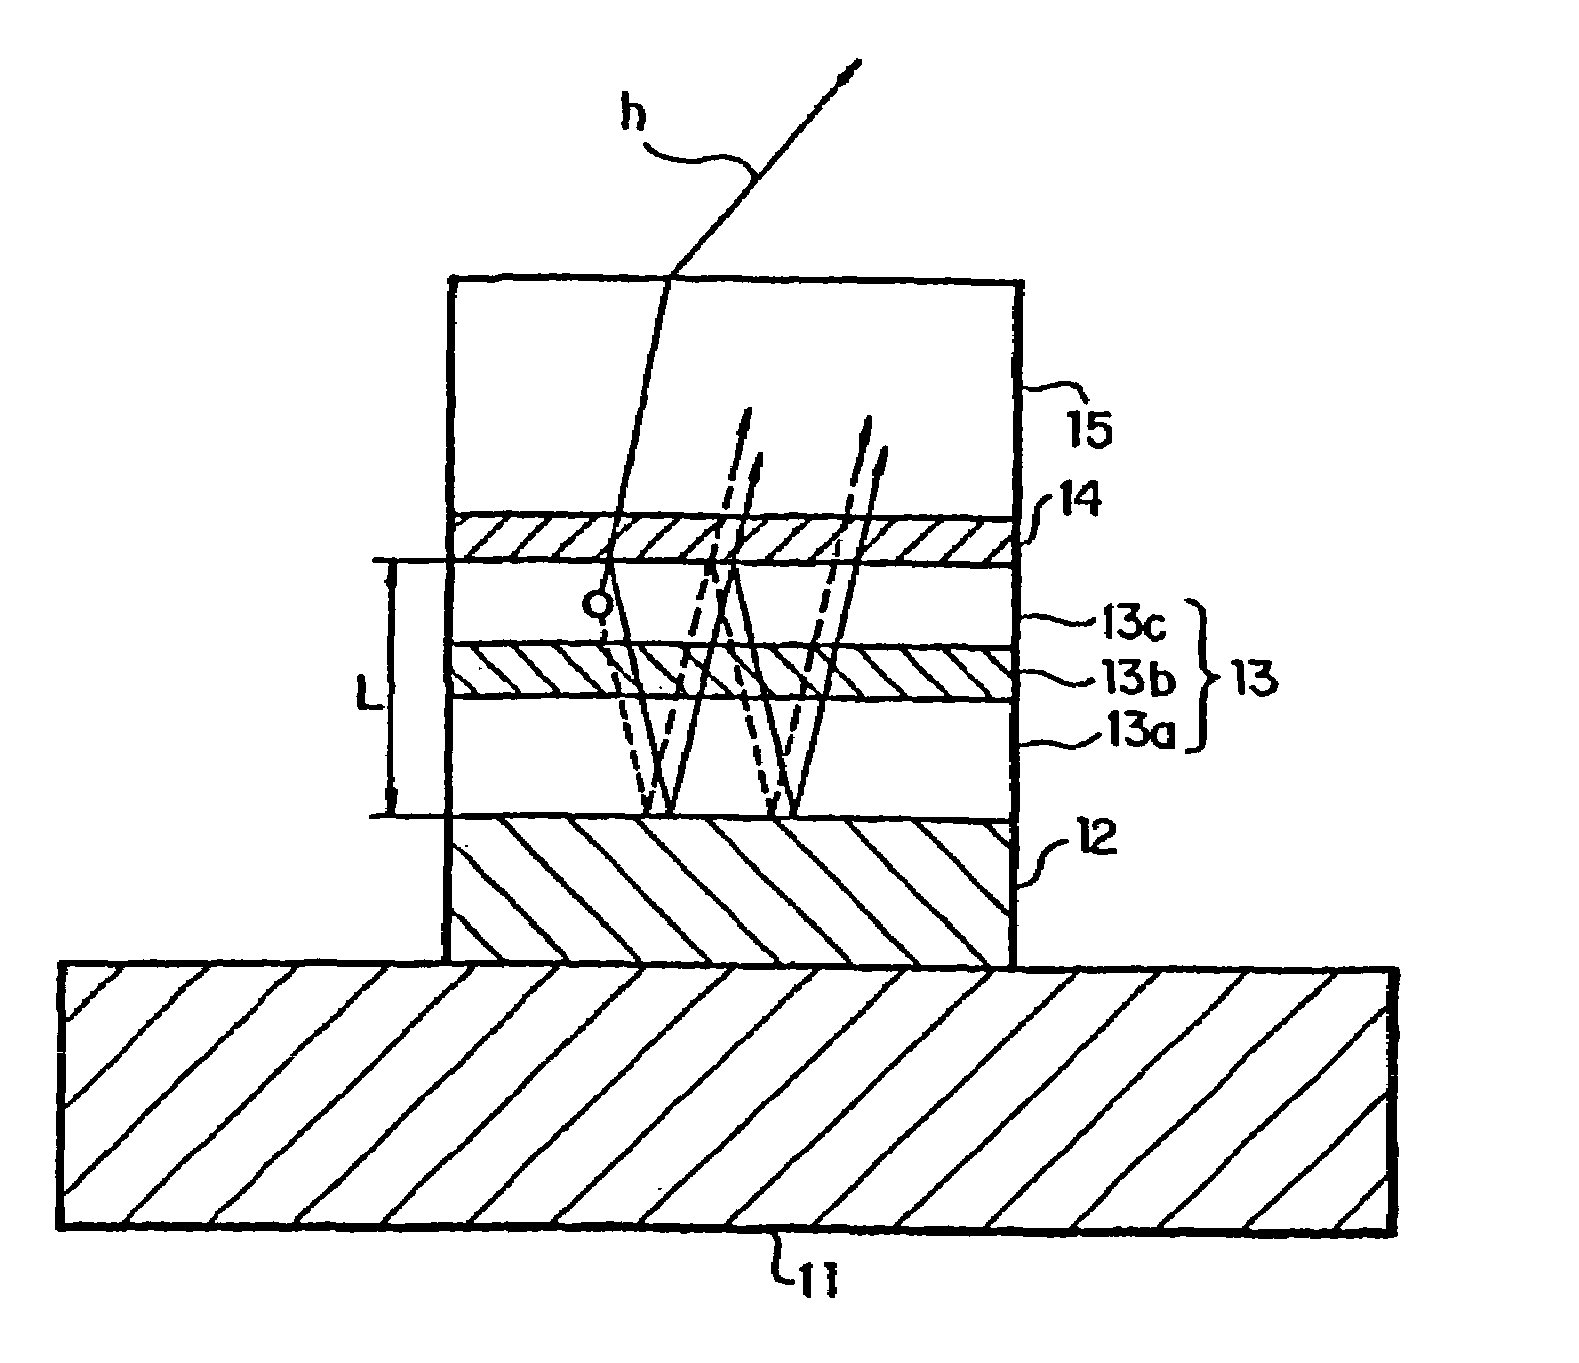 Display device with a cavity structure for resonating light